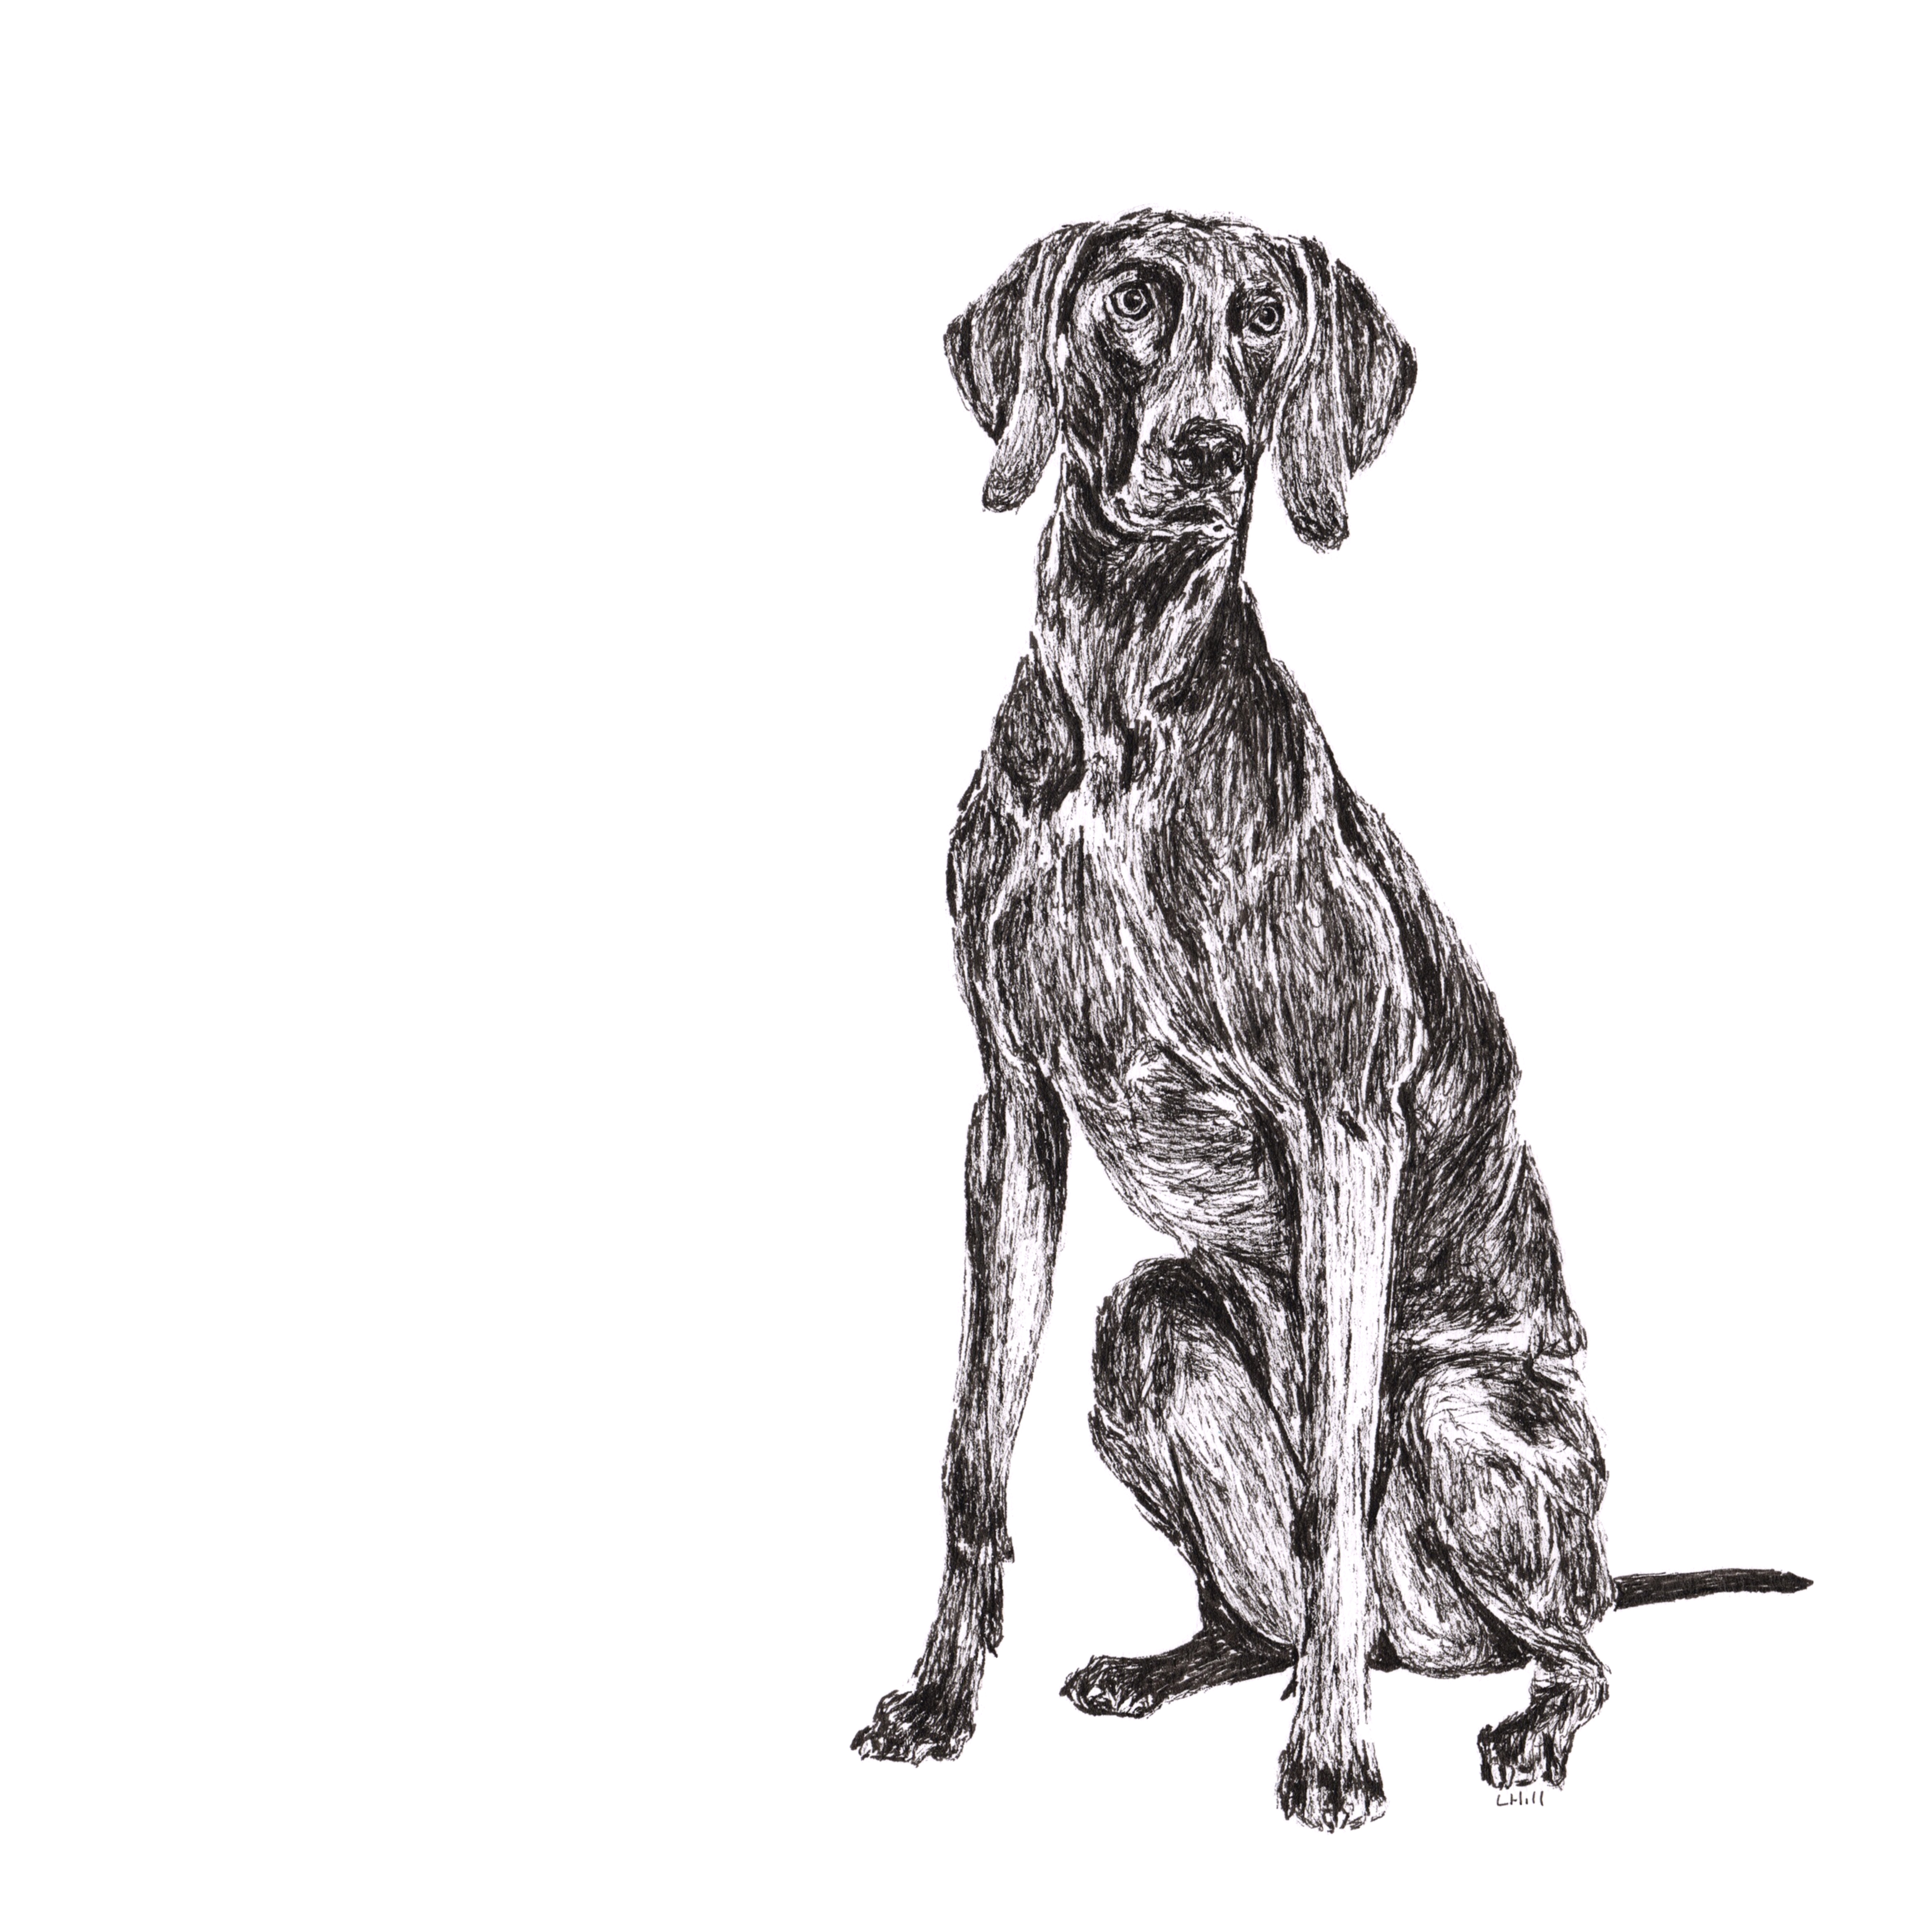 Weimaraner pen and ink illustration by Louisa Hill